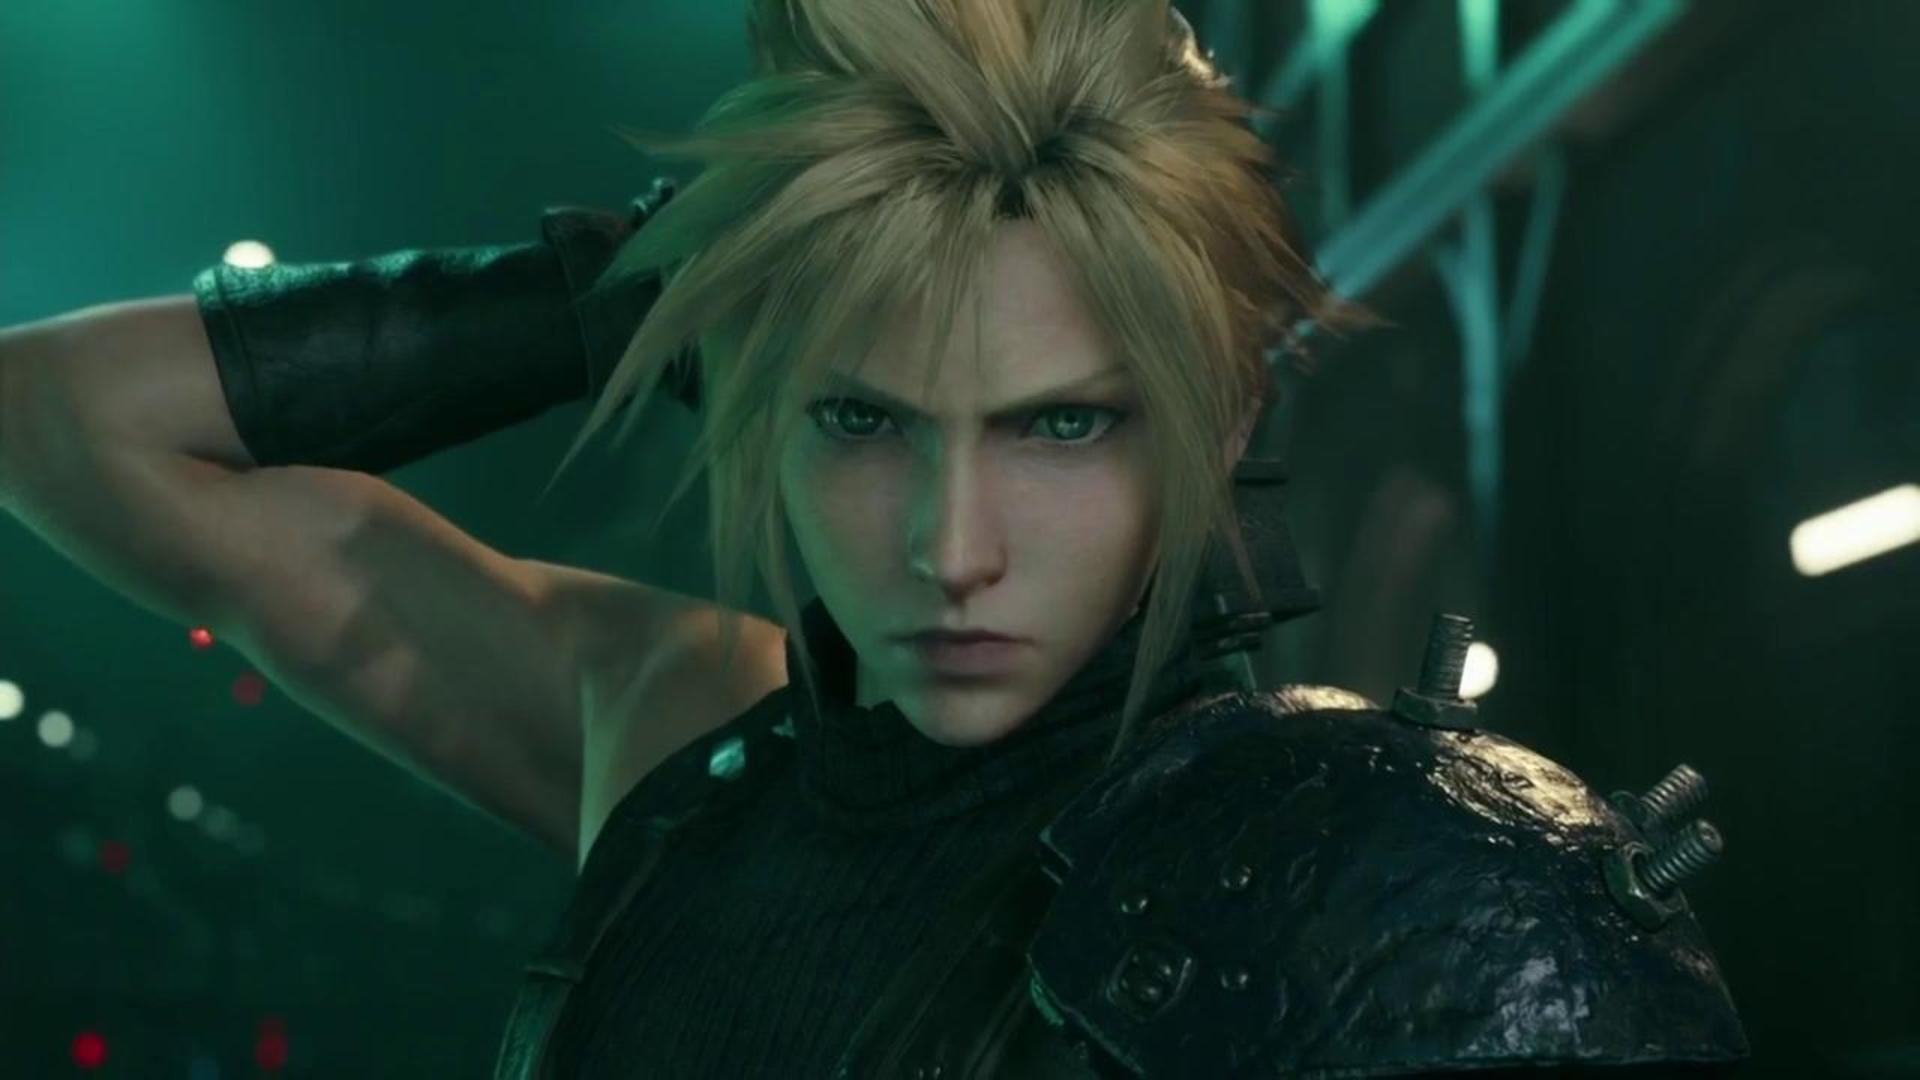 Final Fantasy VII Remake REVIEW: A ton of fun if you play 